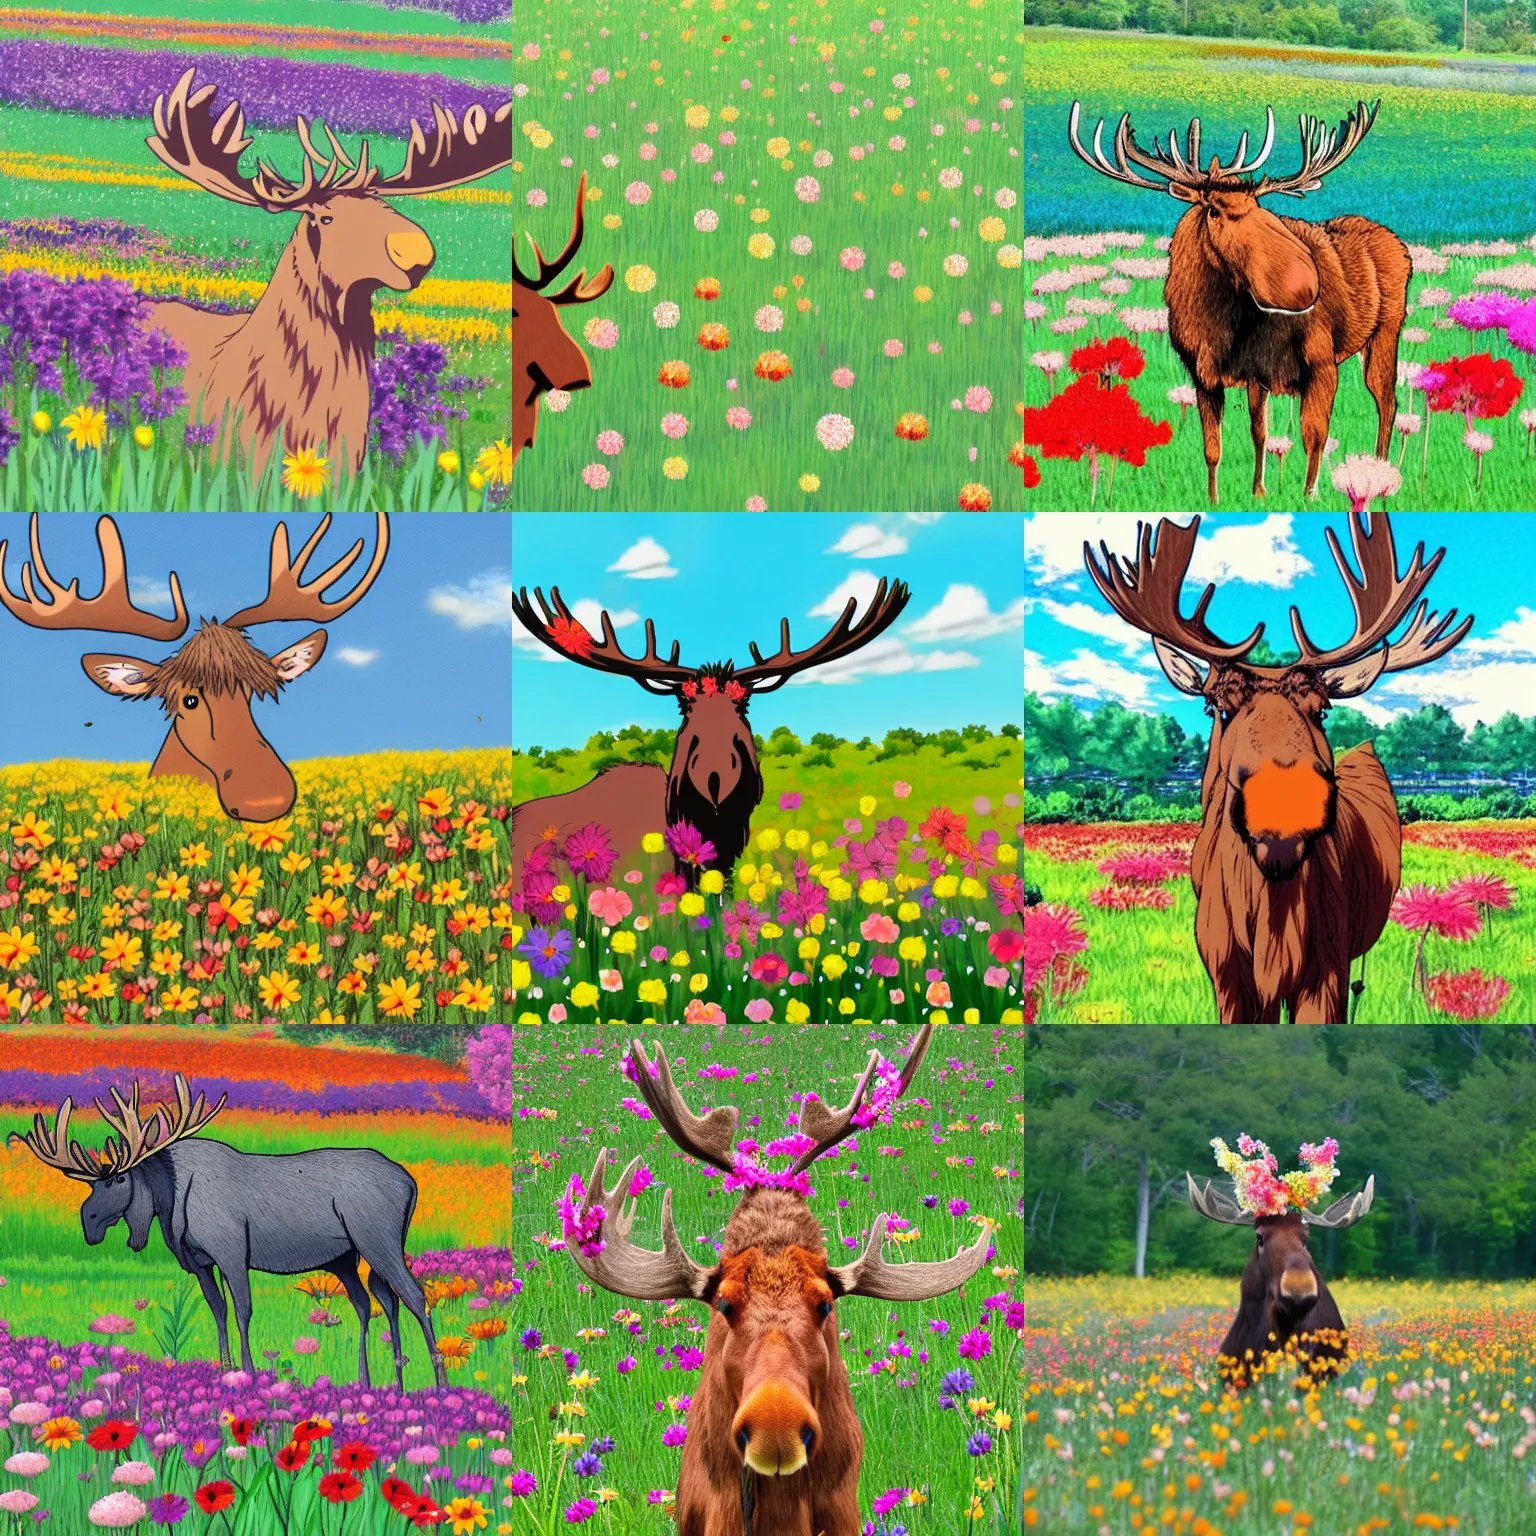 Prompt: a field of flowers with a happy moose in the style of an anime